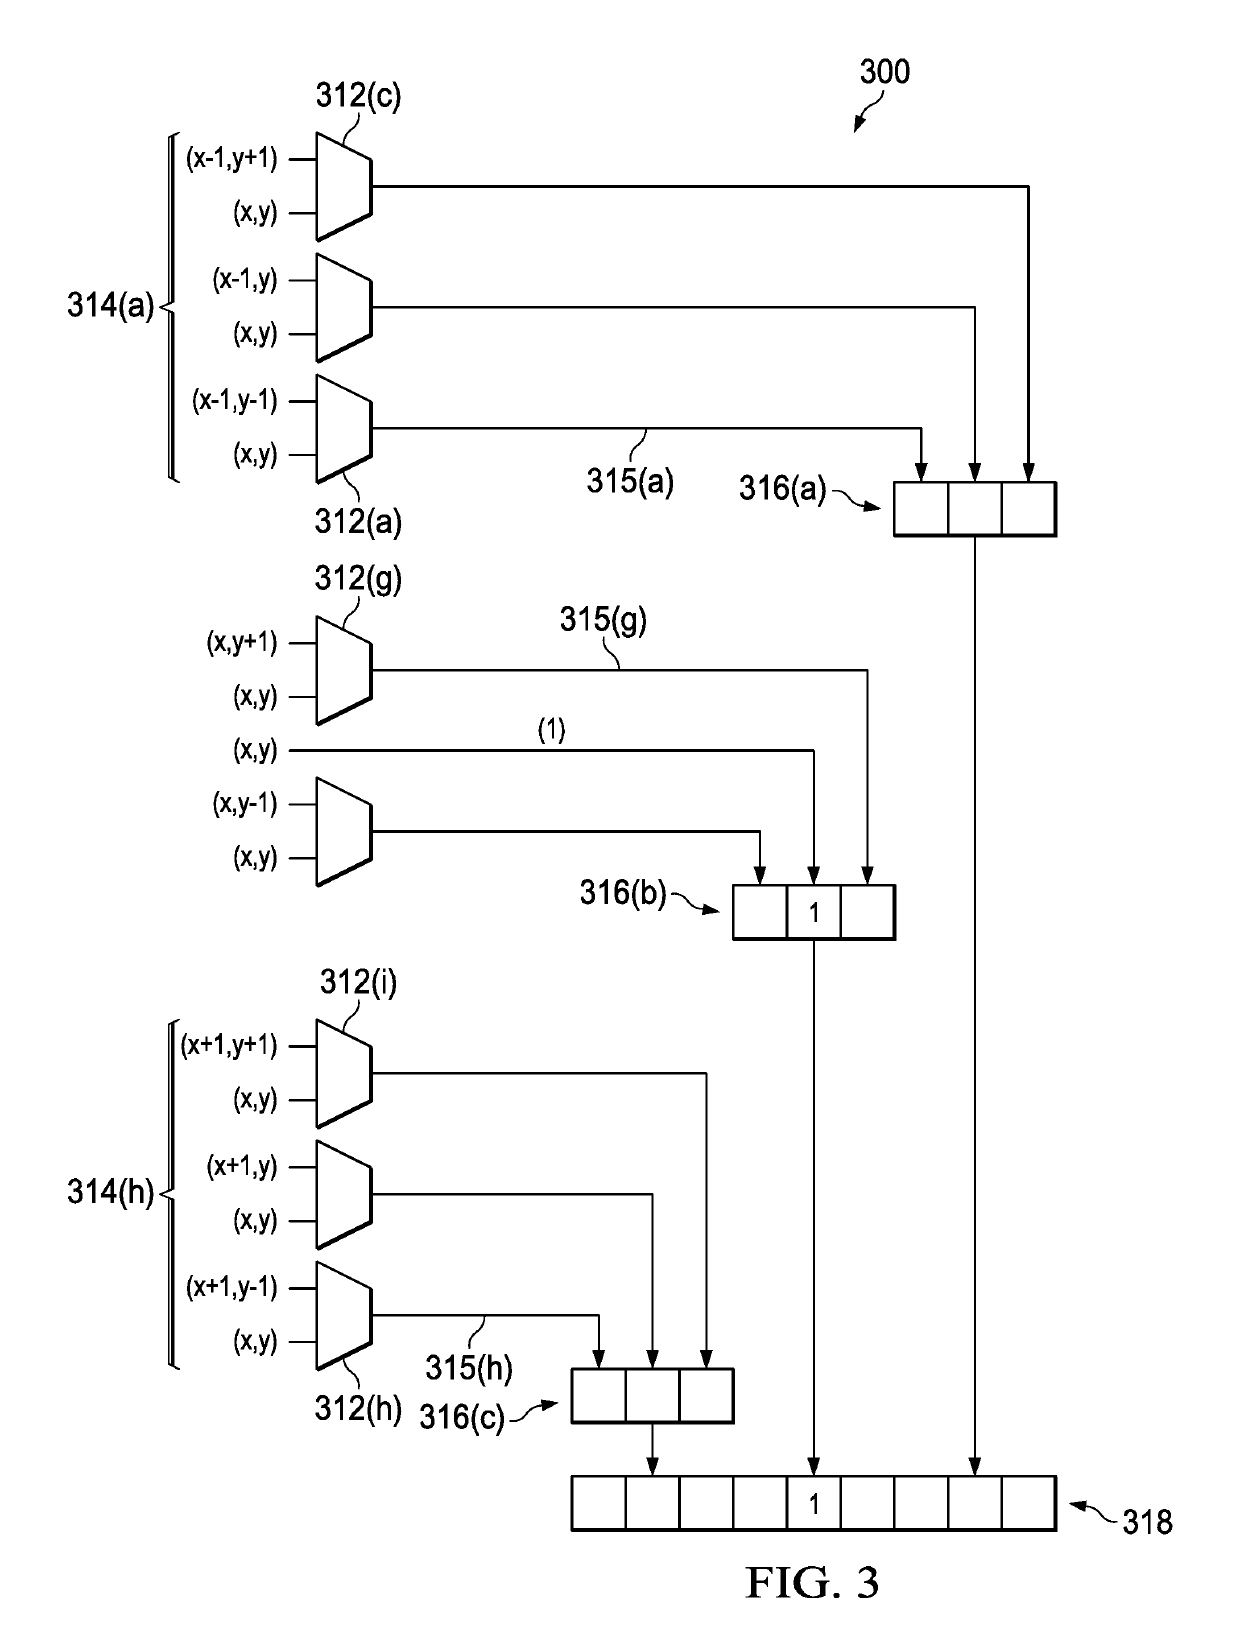 System and method for an efficient hardware implementation of census transform